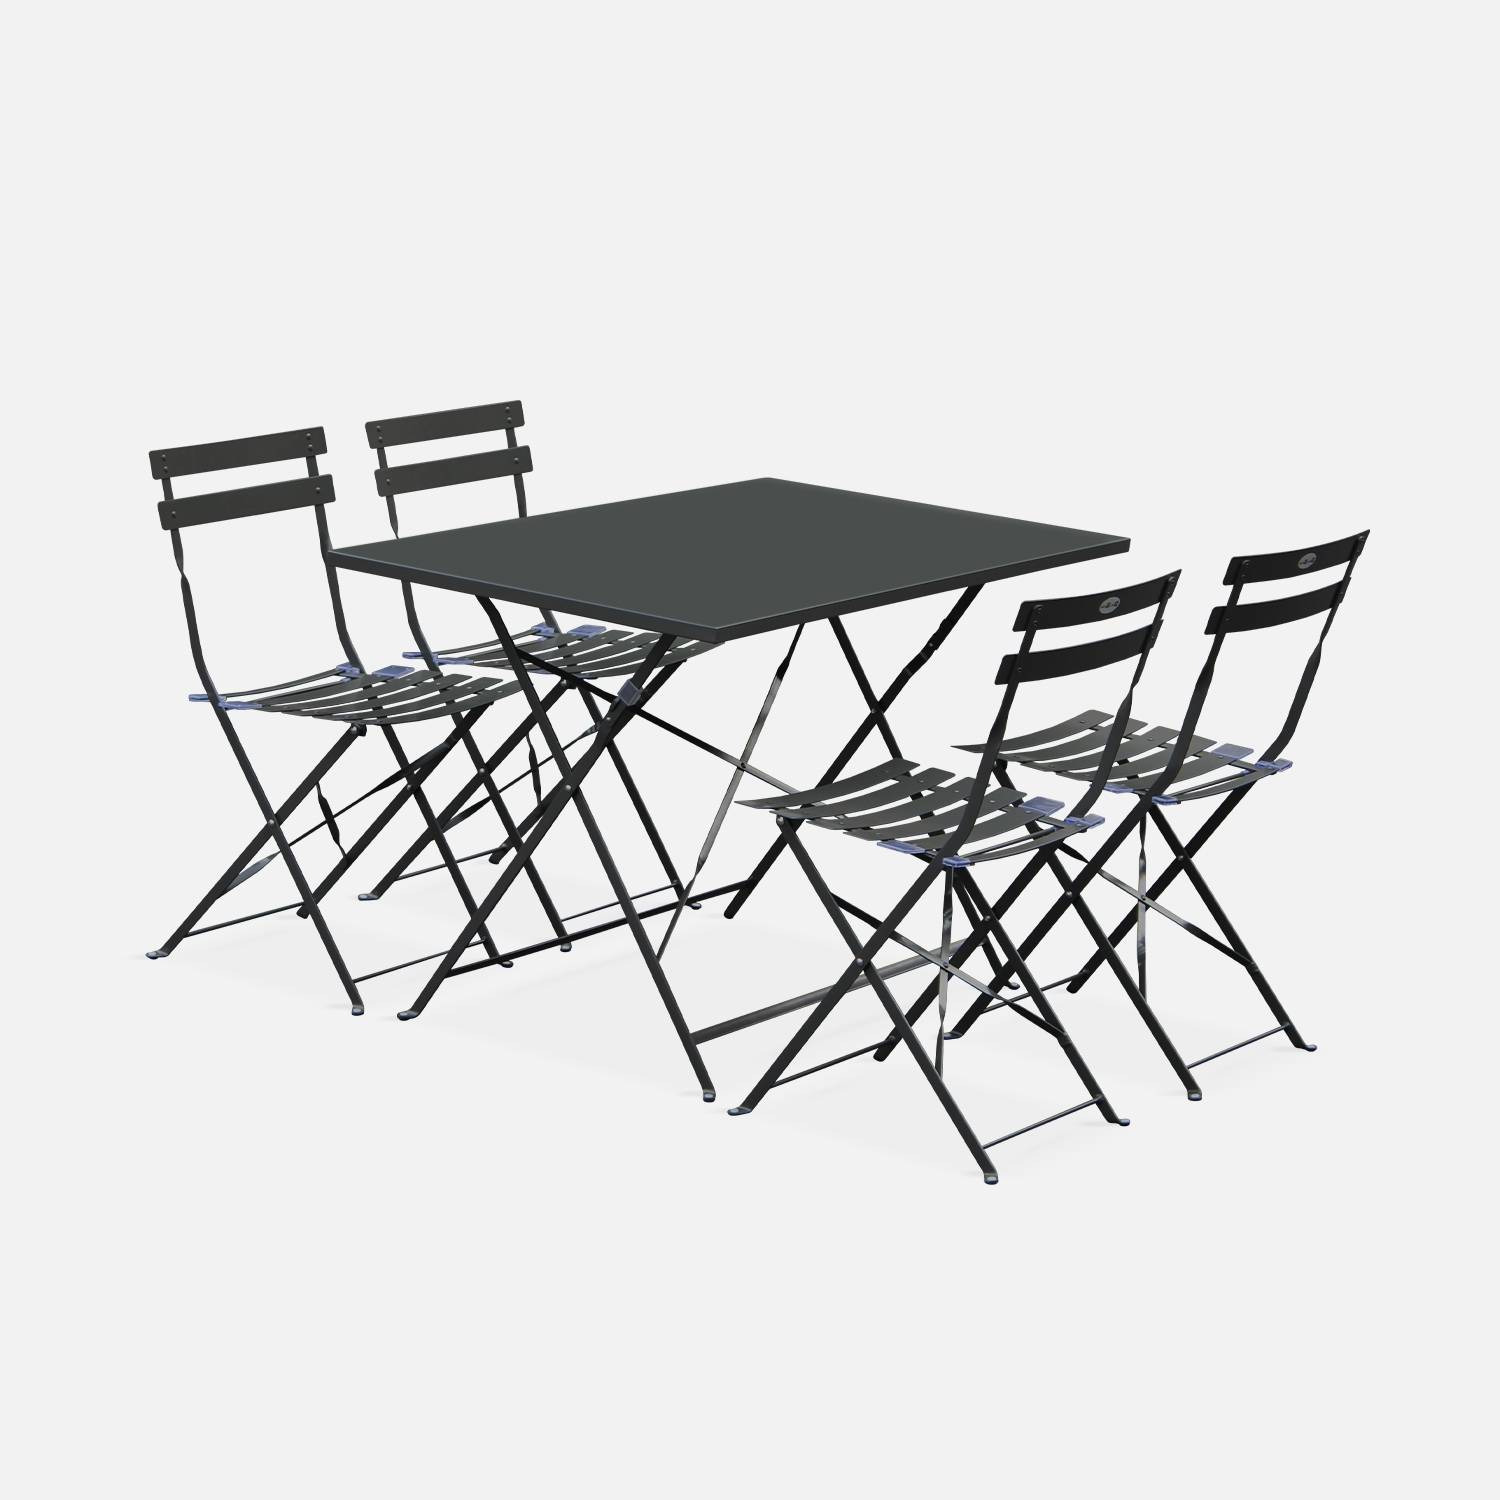 4-seater foldable thermo-lacquered steel bistro garden table with chairs, Anthracite